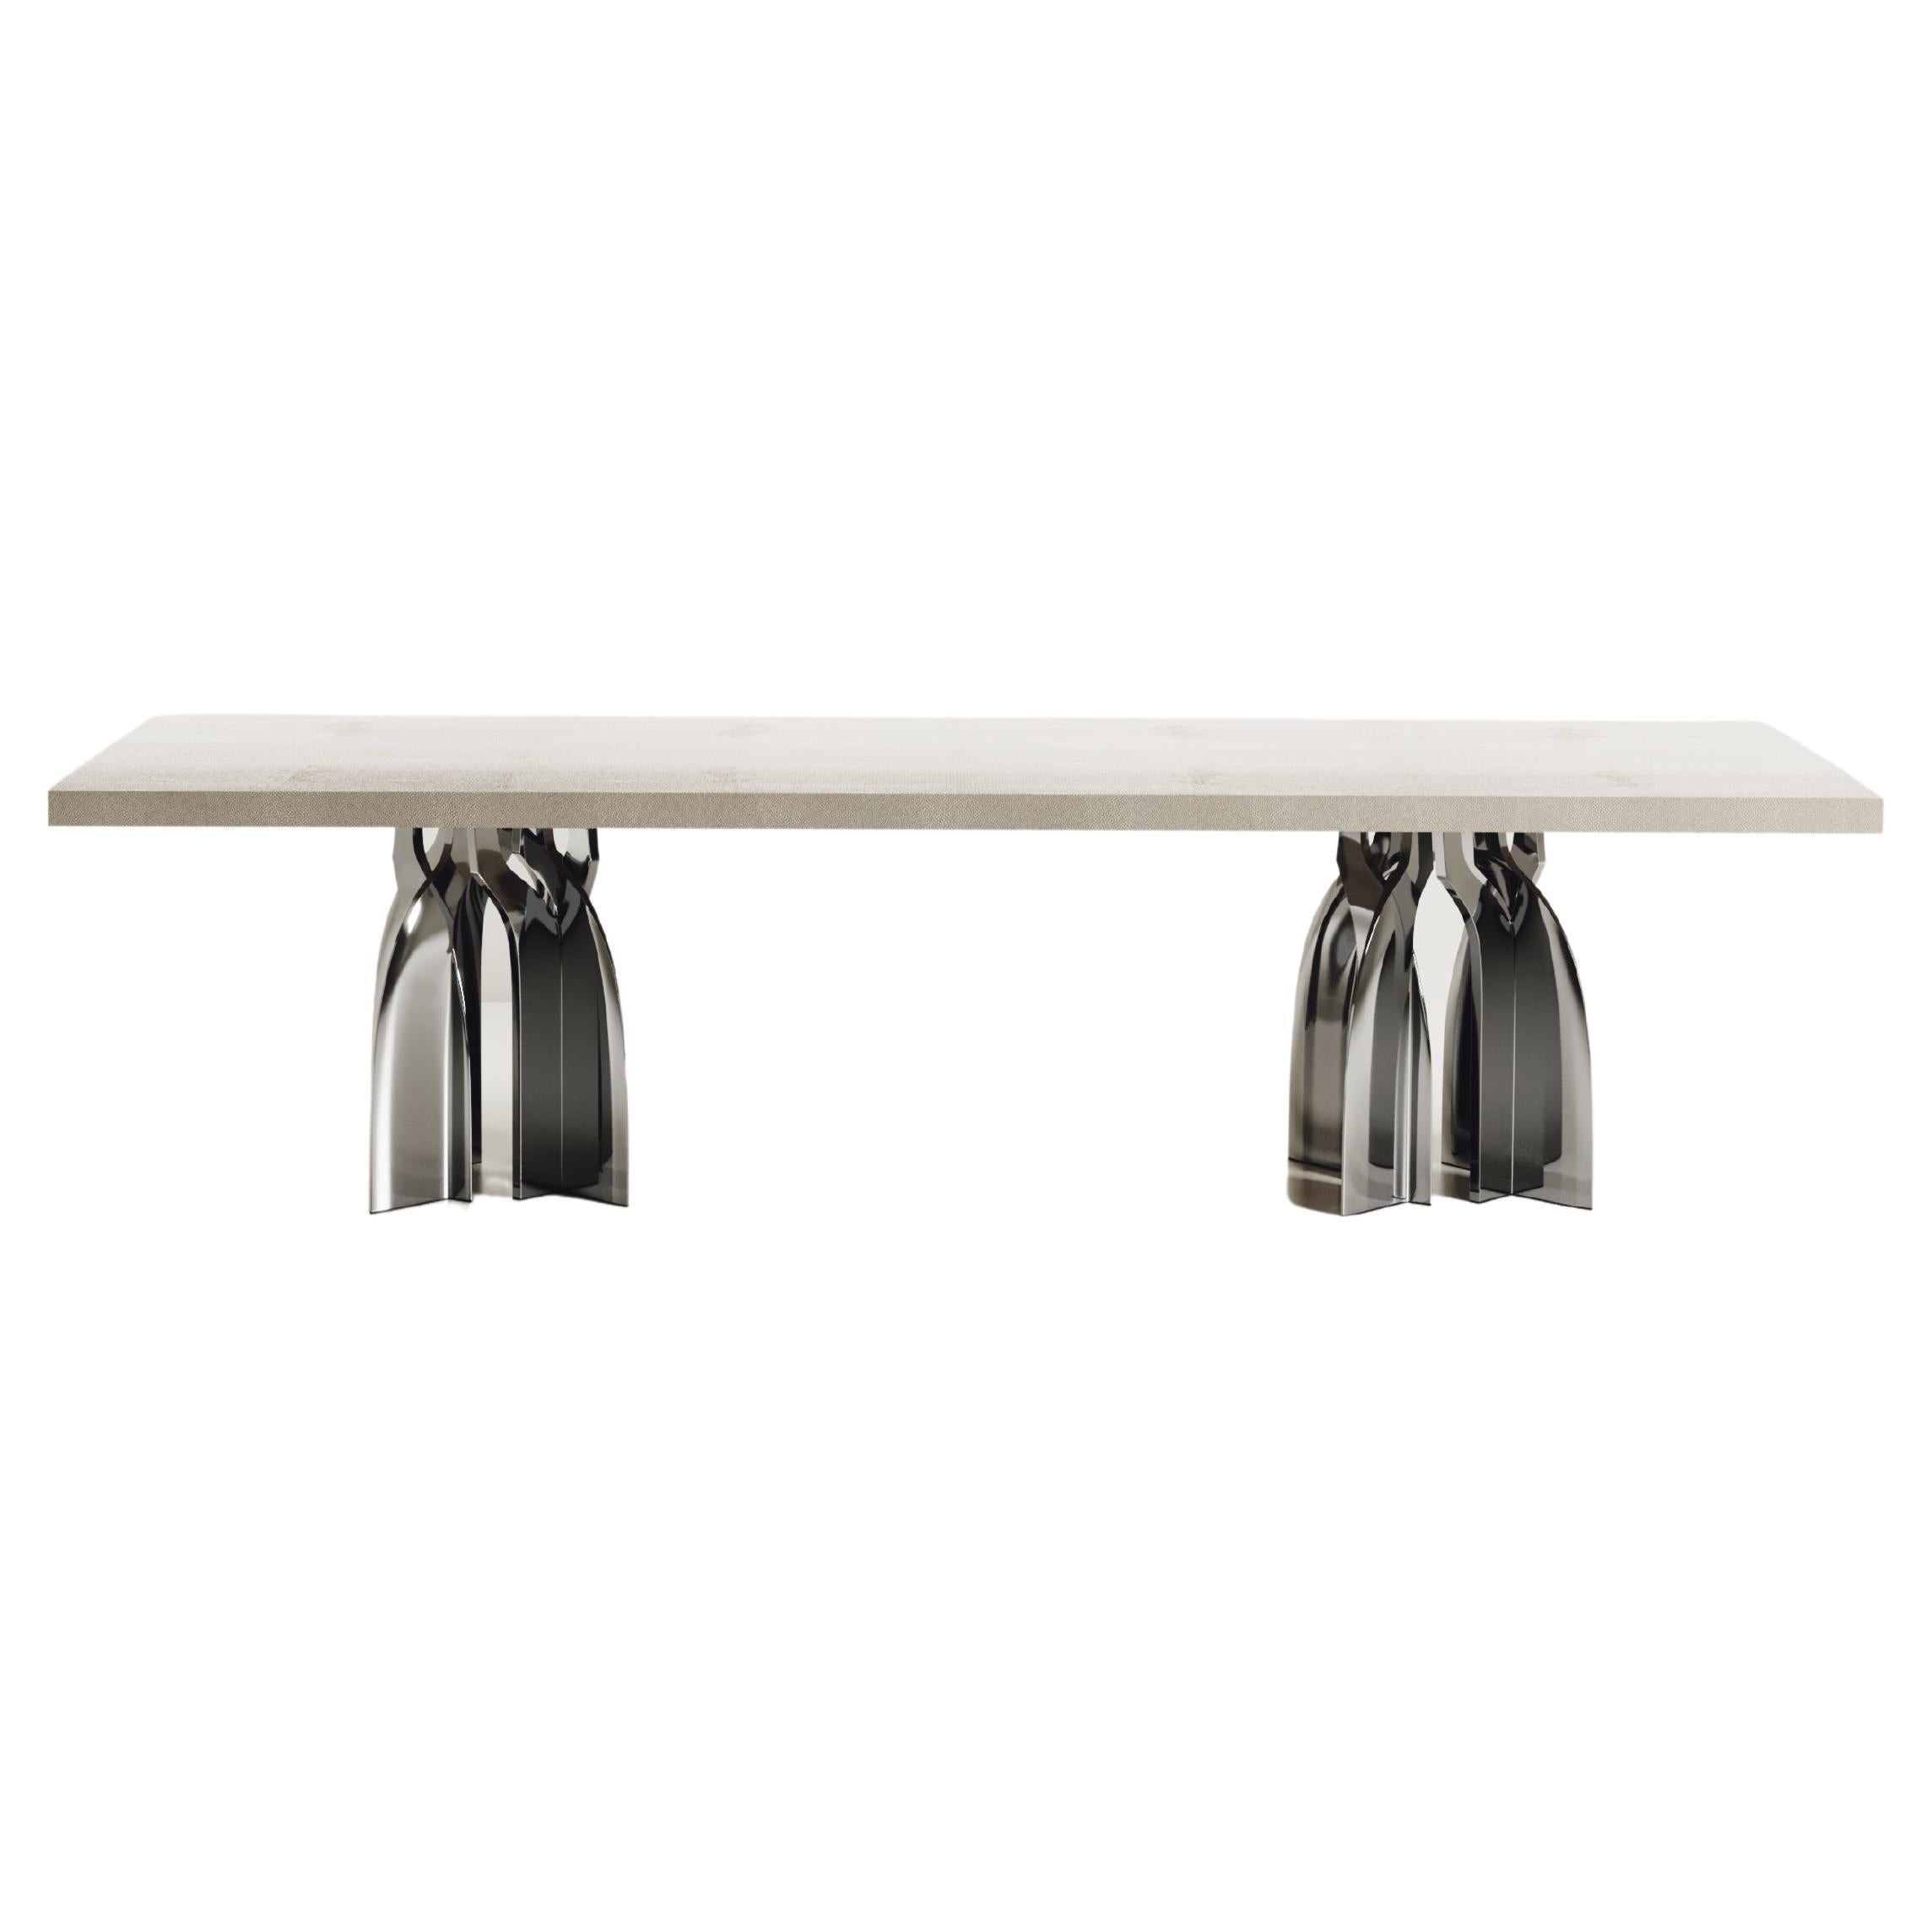 Sculptural Dining Table in Shagreen & Stainless Steel by Kifu Paris For Sale